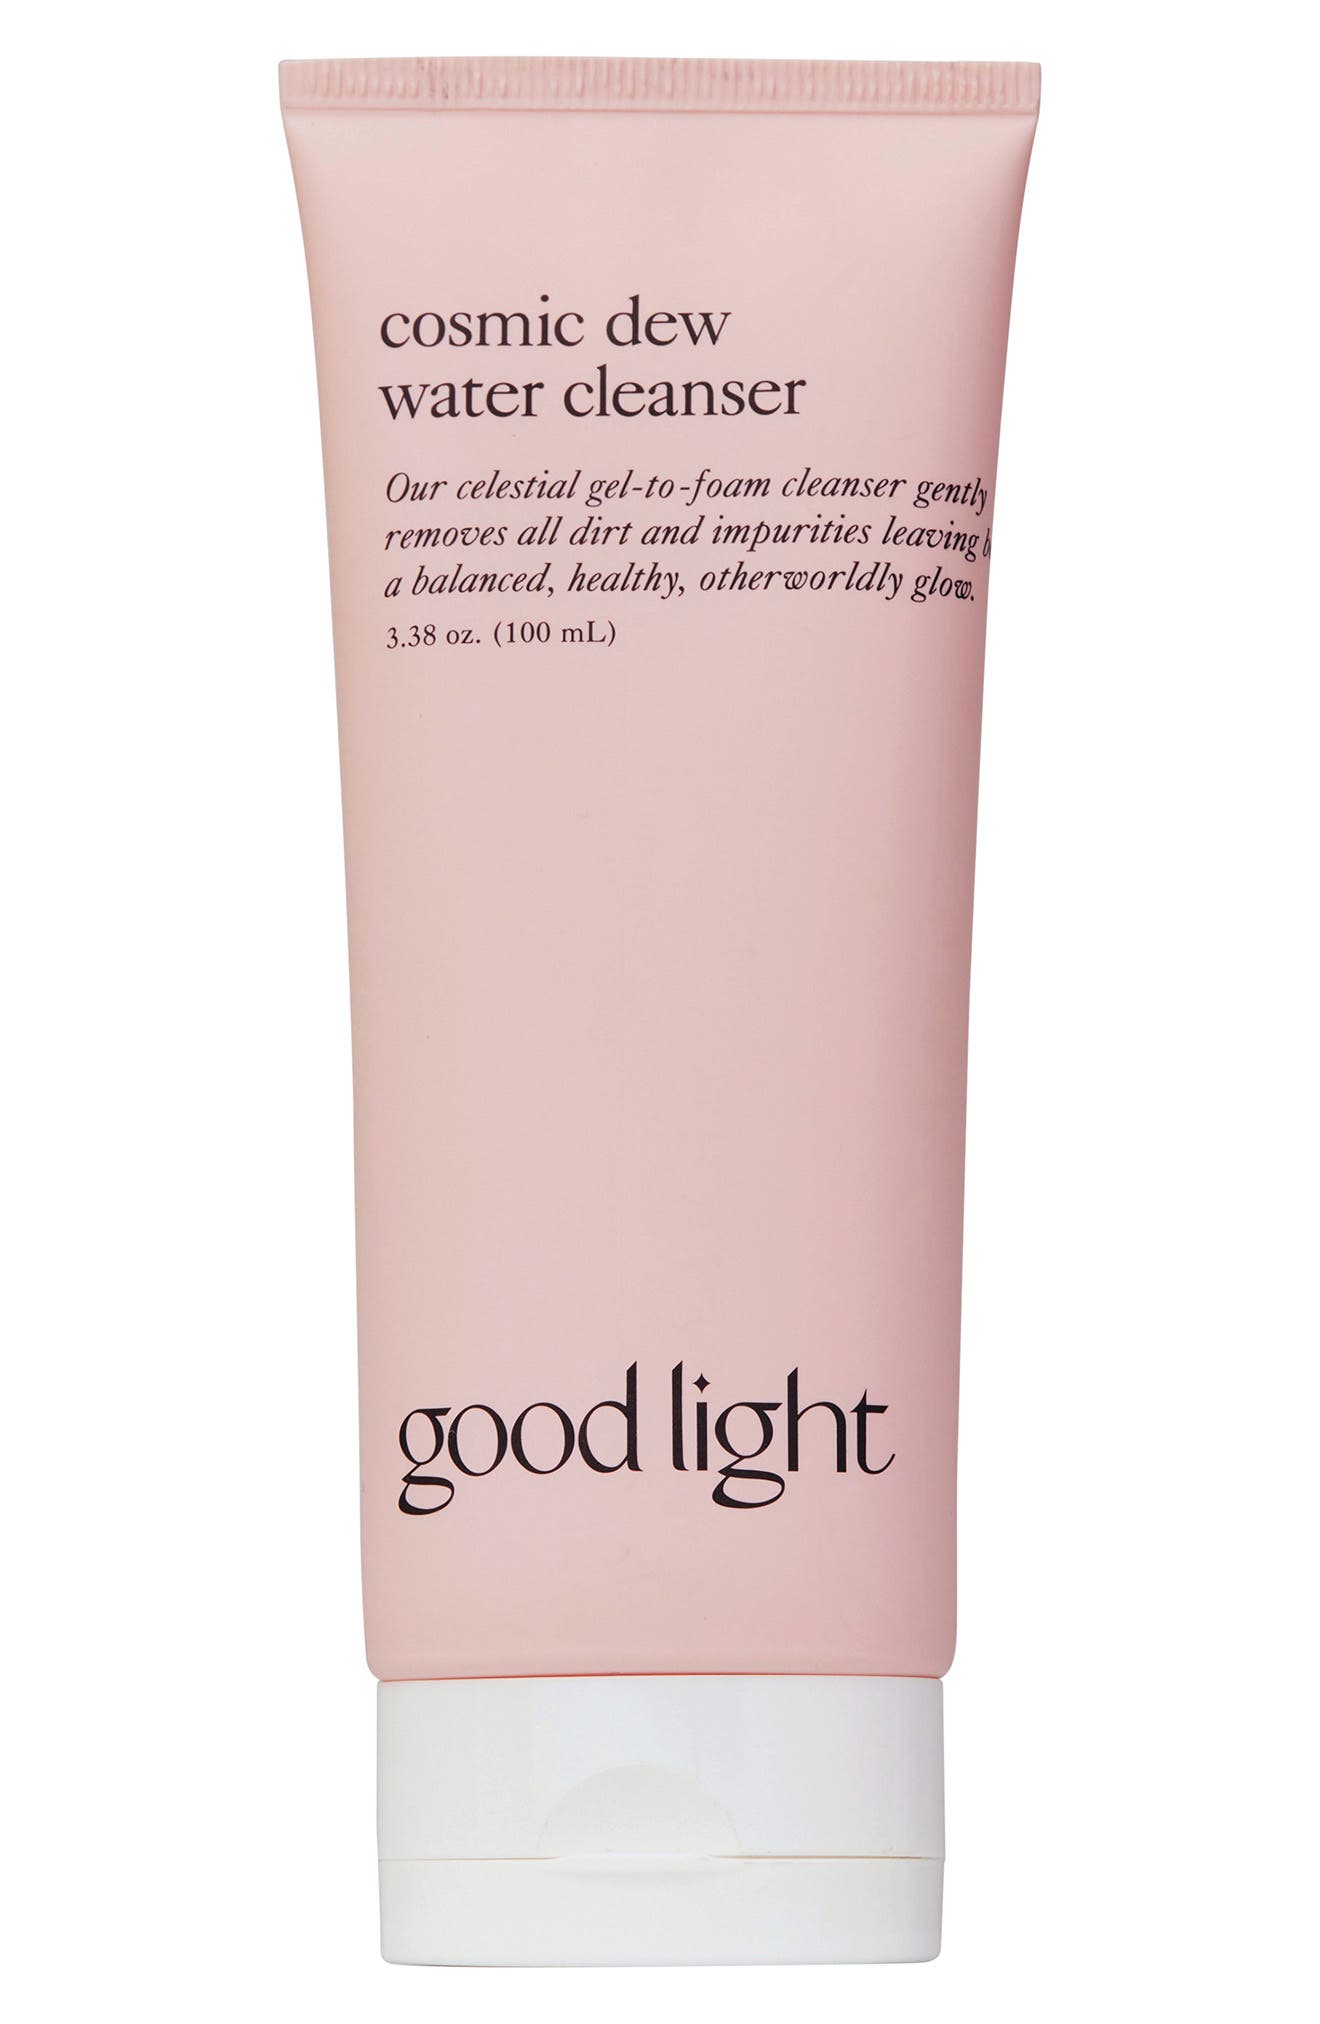 GOOD LIGHT Cosmic Dew Water Cleanser at Nordstrom